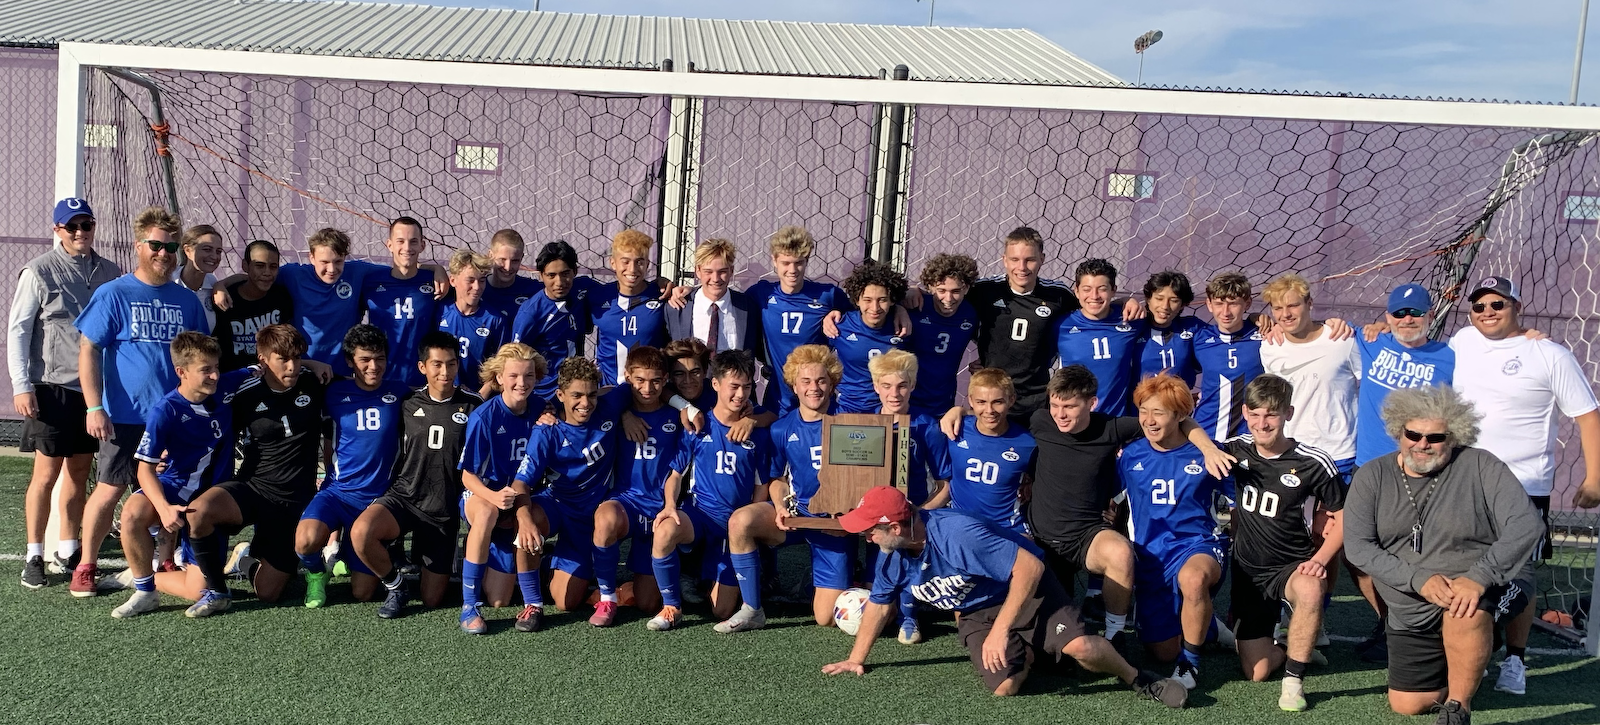 Boys soccer earns berth in State Championship match with 2-1 victory over Cathedral cover photo